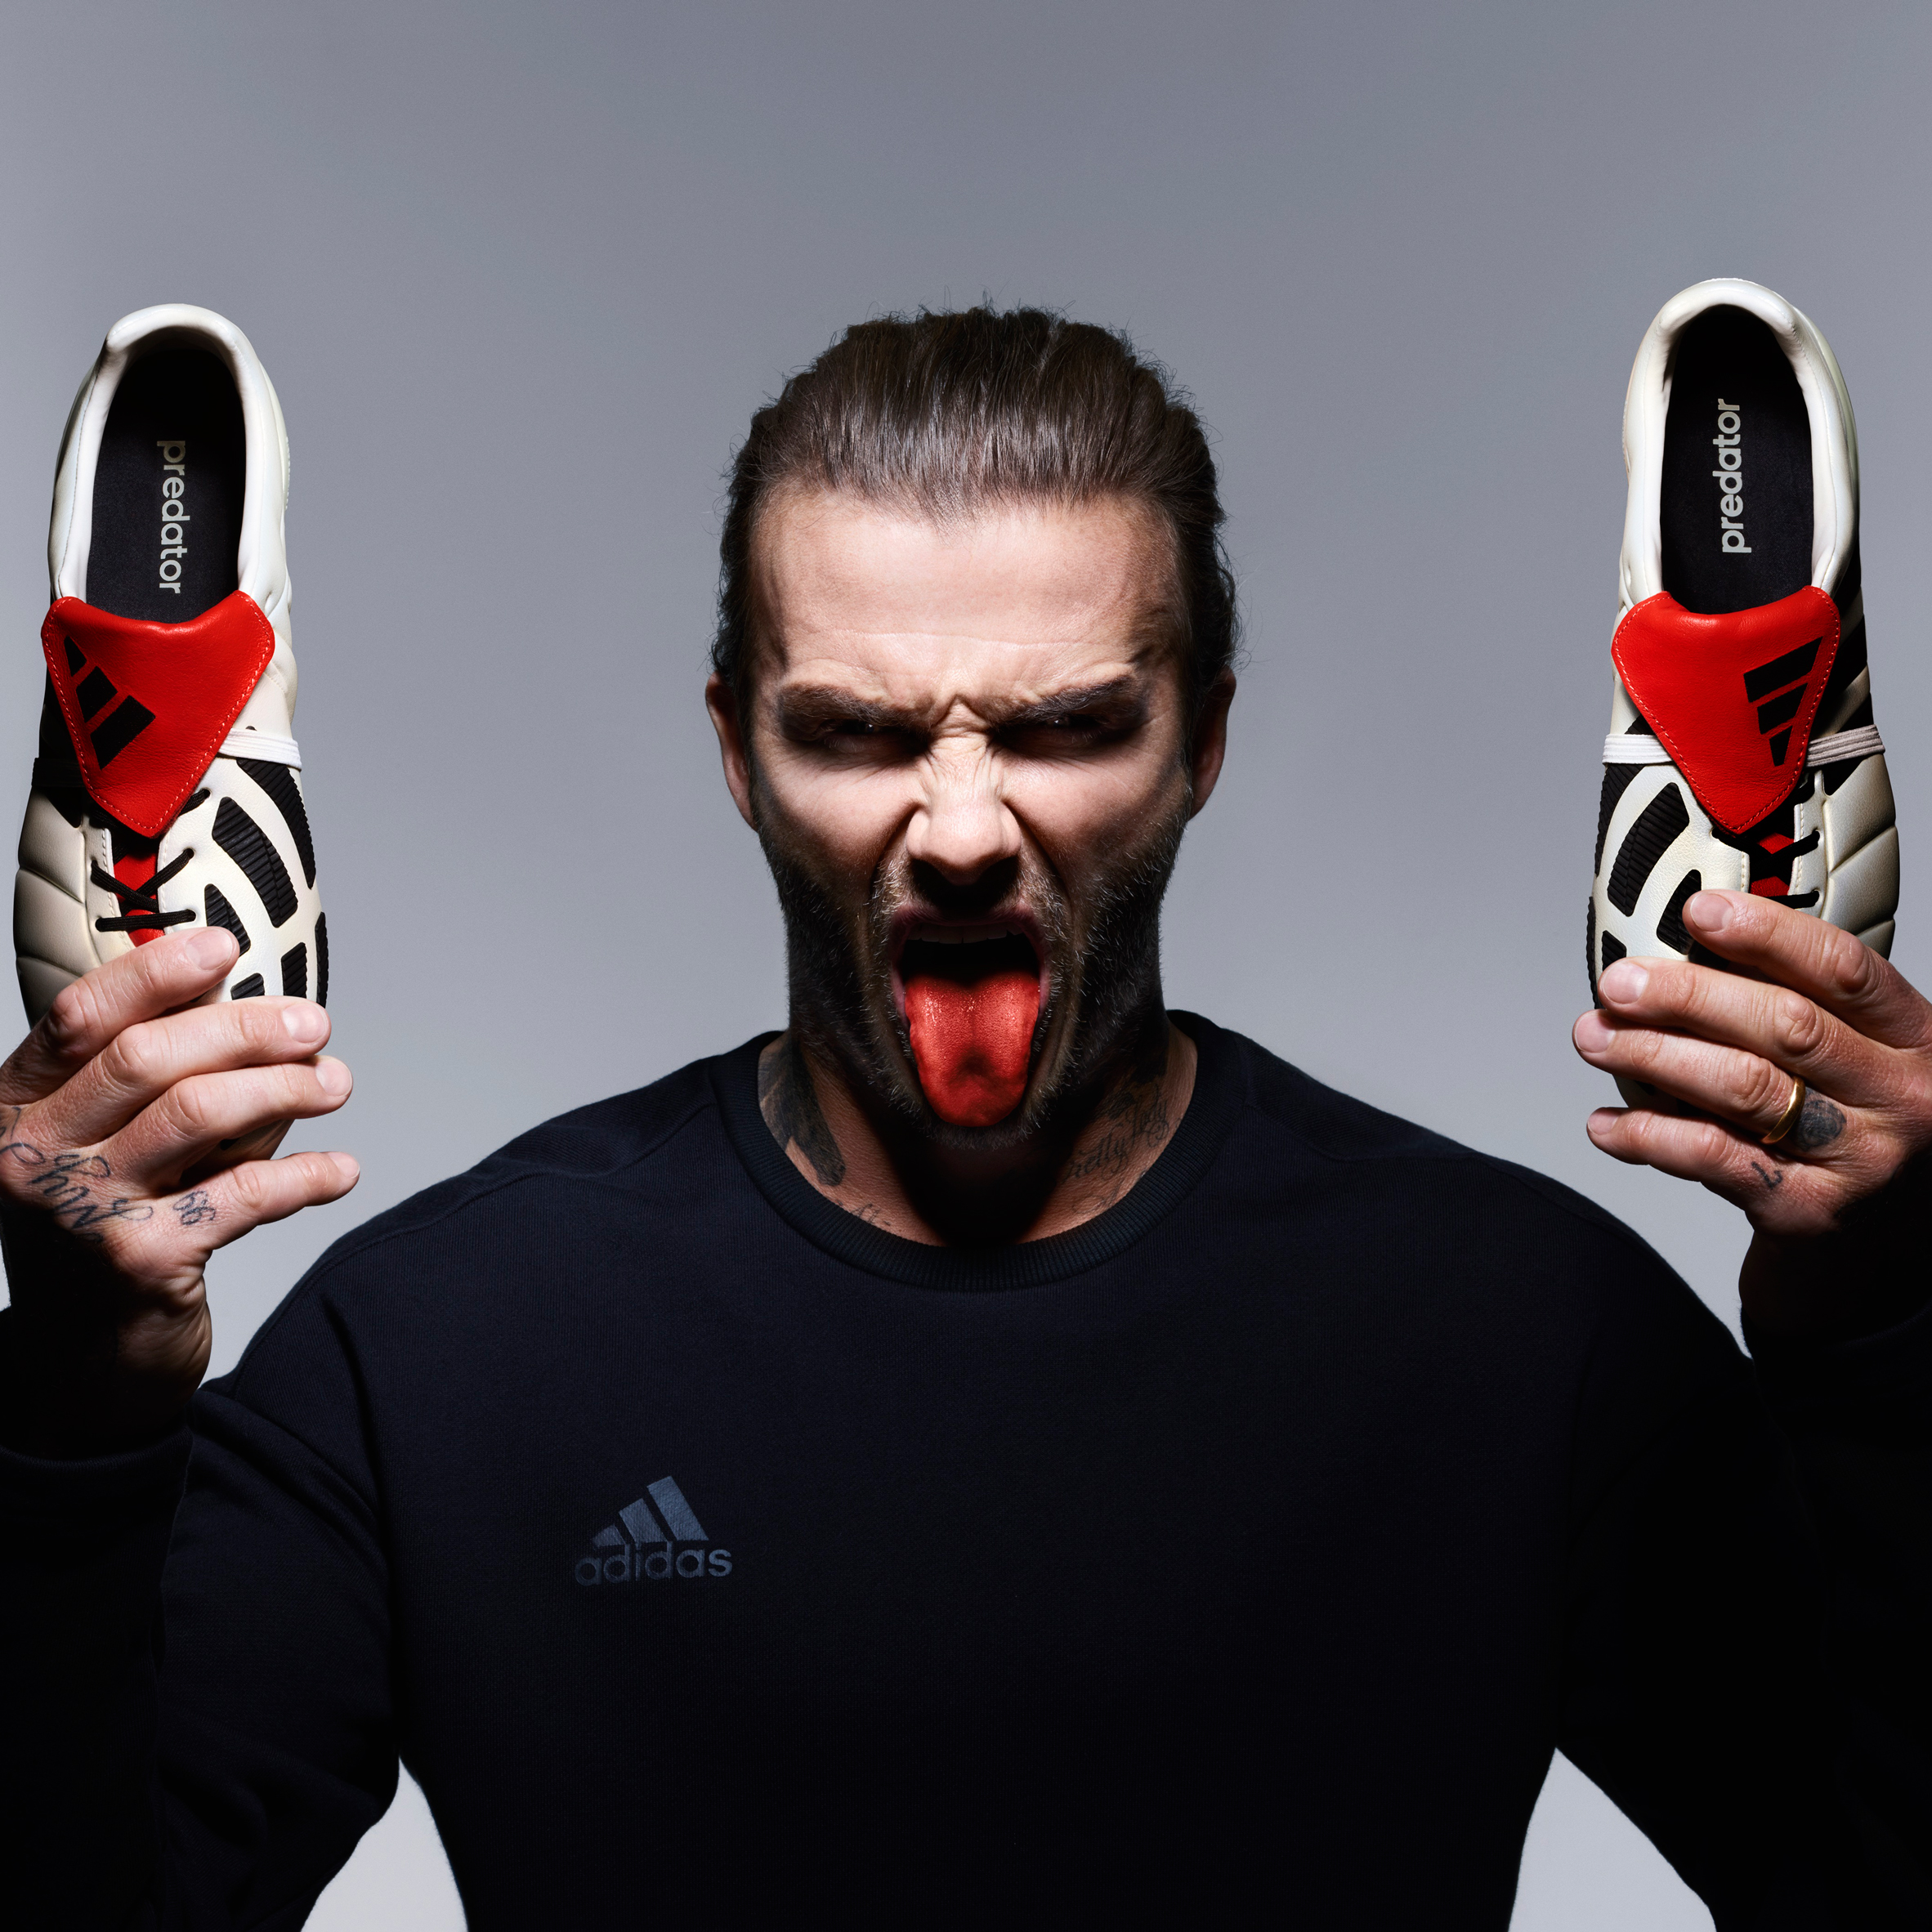 Adidas relaunches iconic football boots 